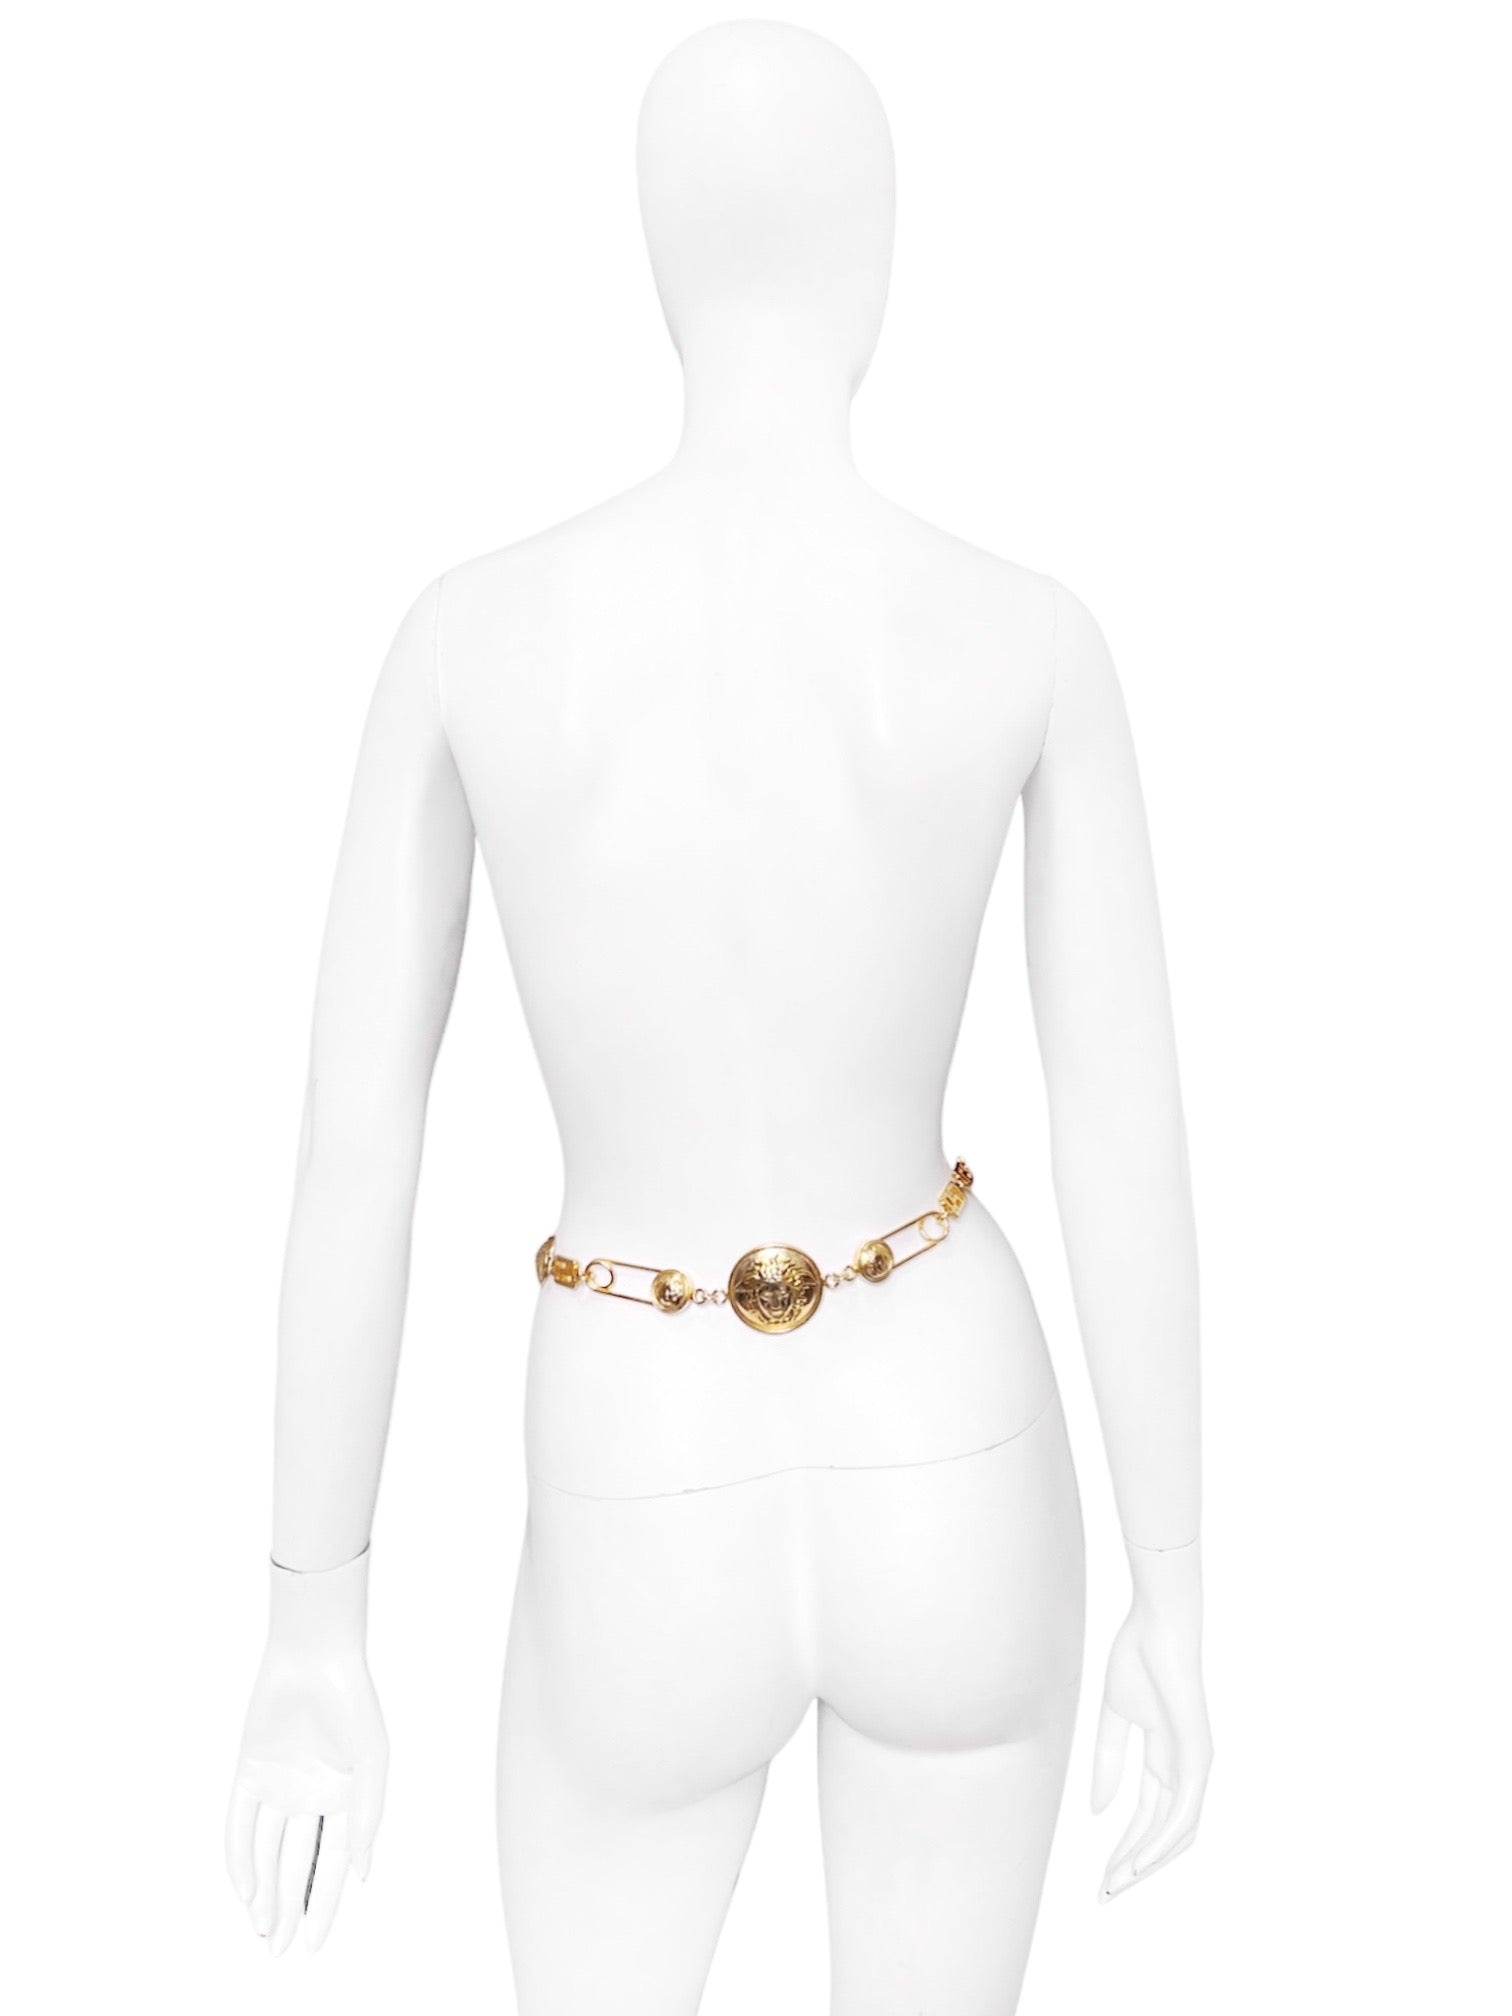 Gianni Versace Iconic Spring 1994 Gold Safety Pin Chain Belt - 10